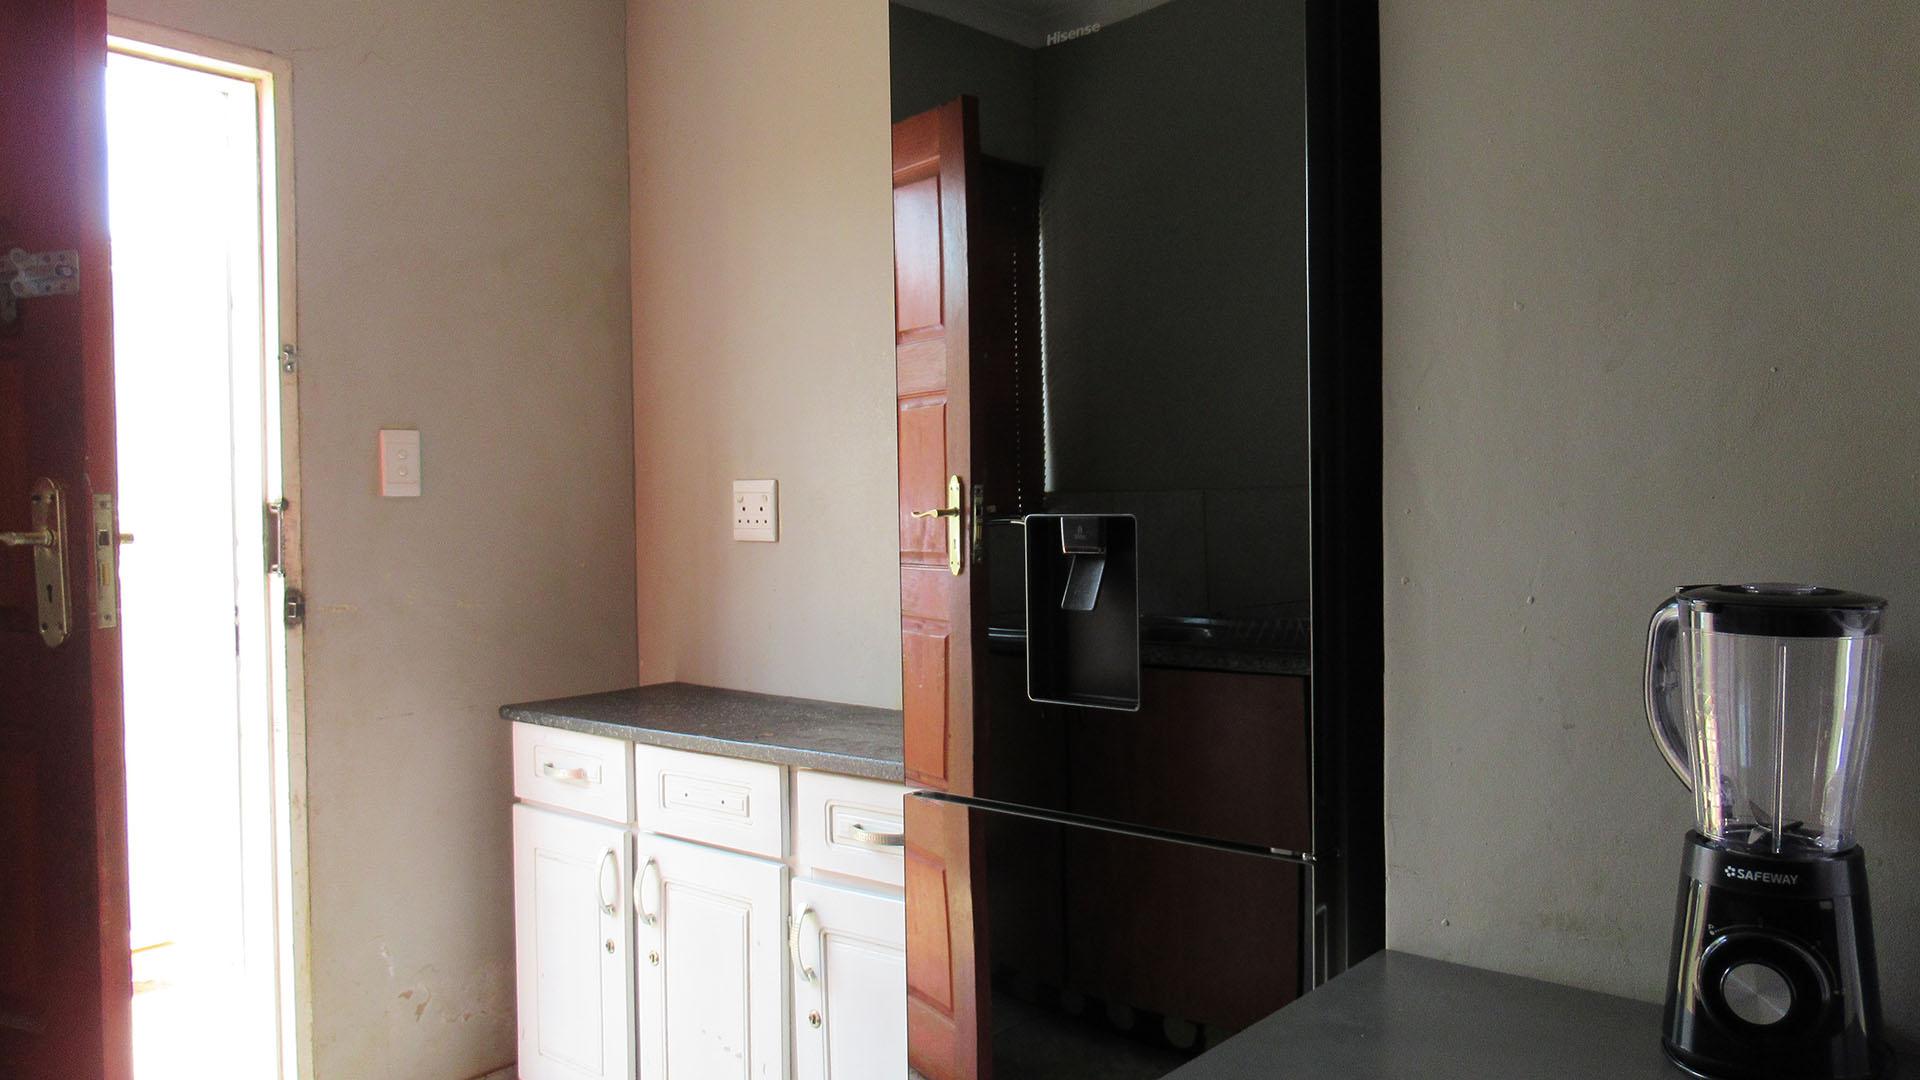 Kitchen - 6 square meters of property in Lehae